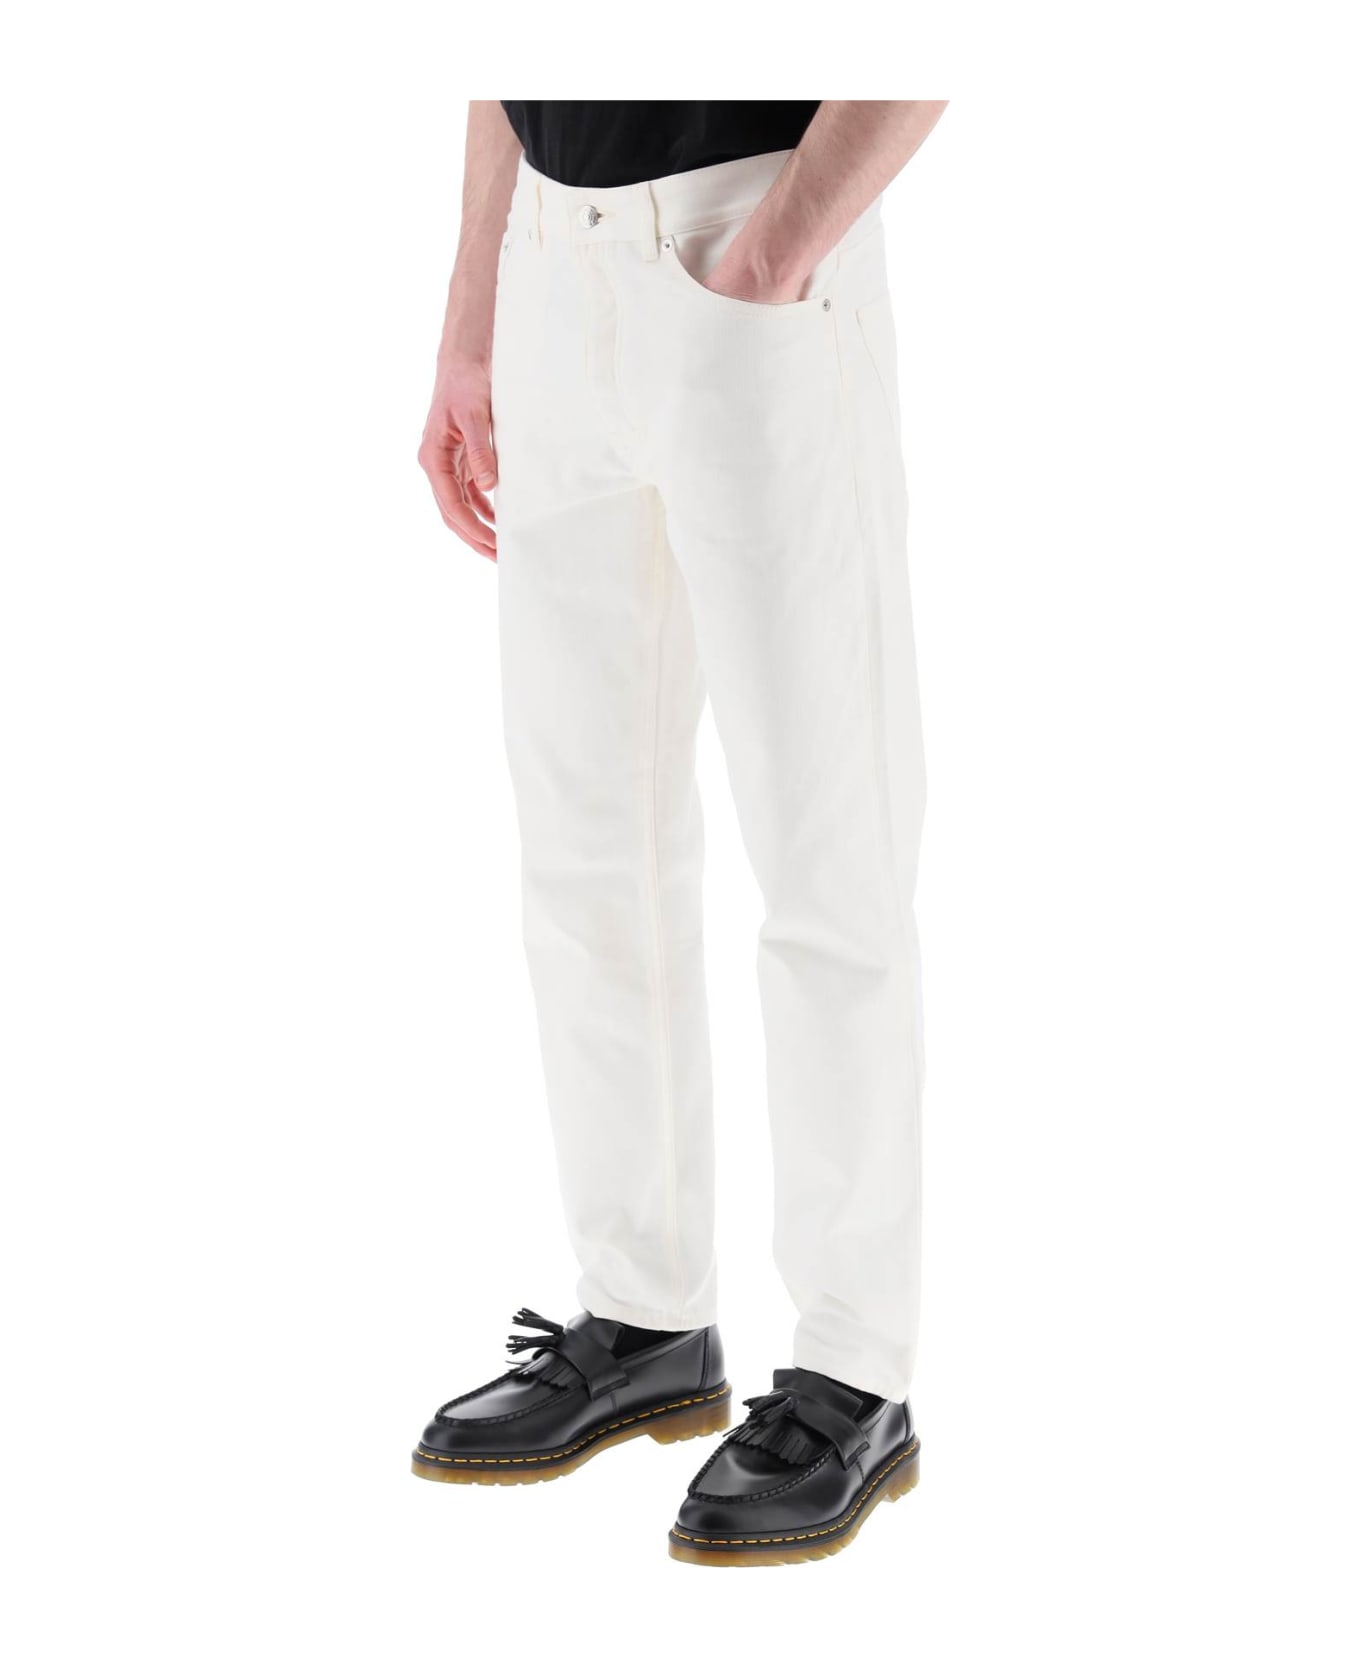 Maison Kitsuné Low-rise Tapered Jeans - OFF WHITE (White)